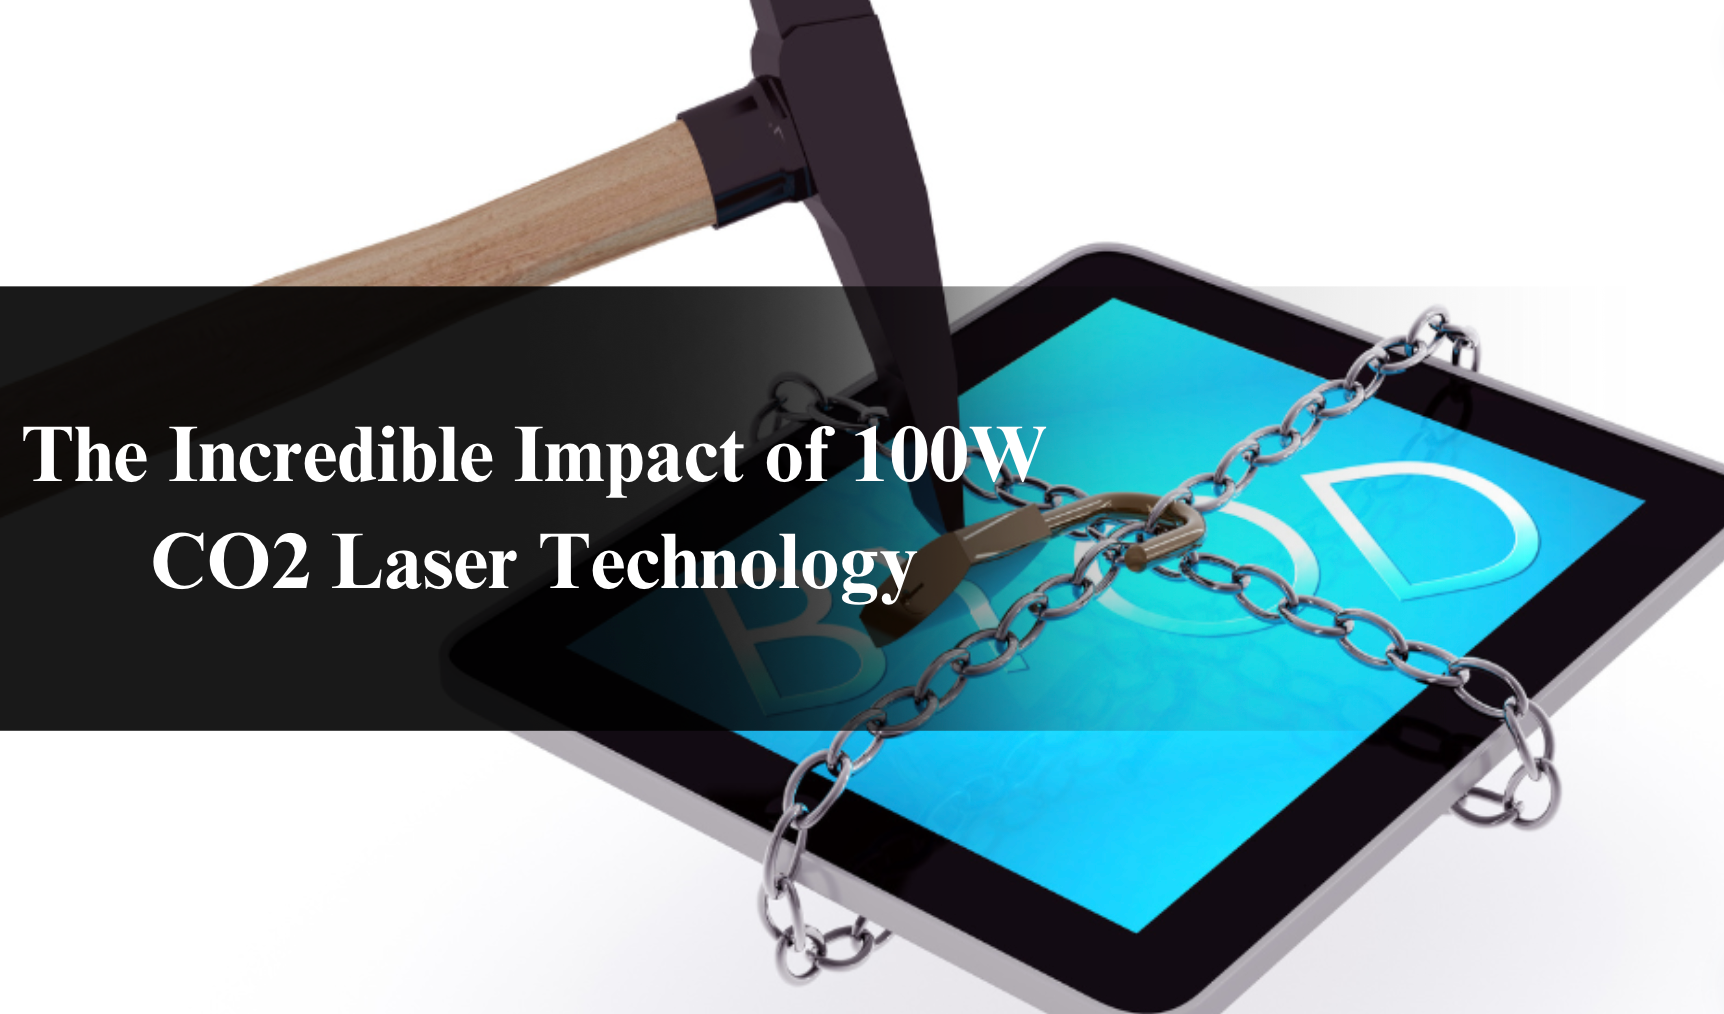 The Incredible Impact of 100W CO2 Laser Technology